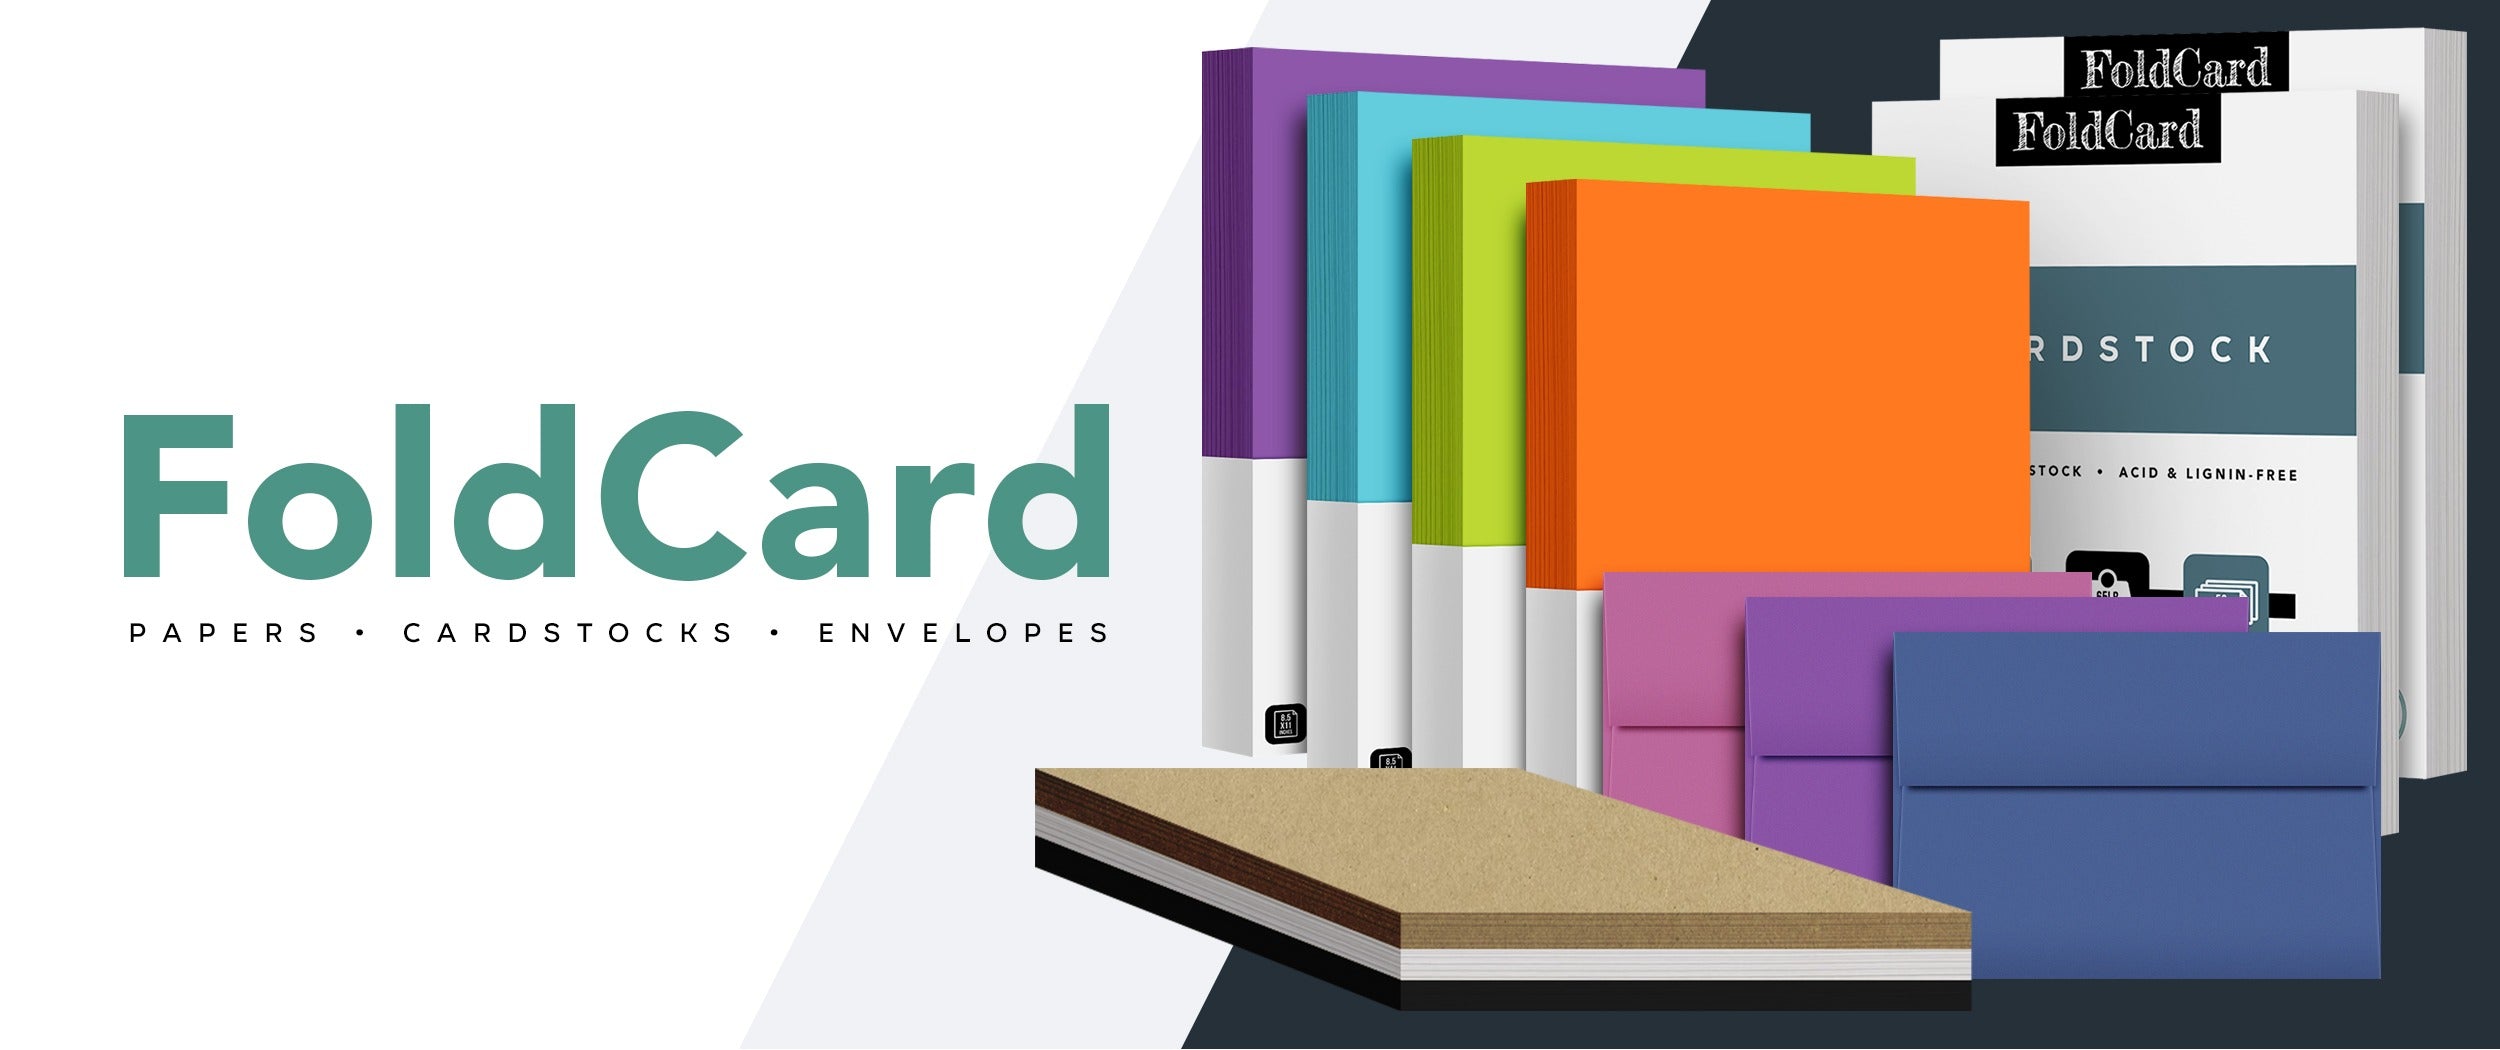 Foldcard Papers